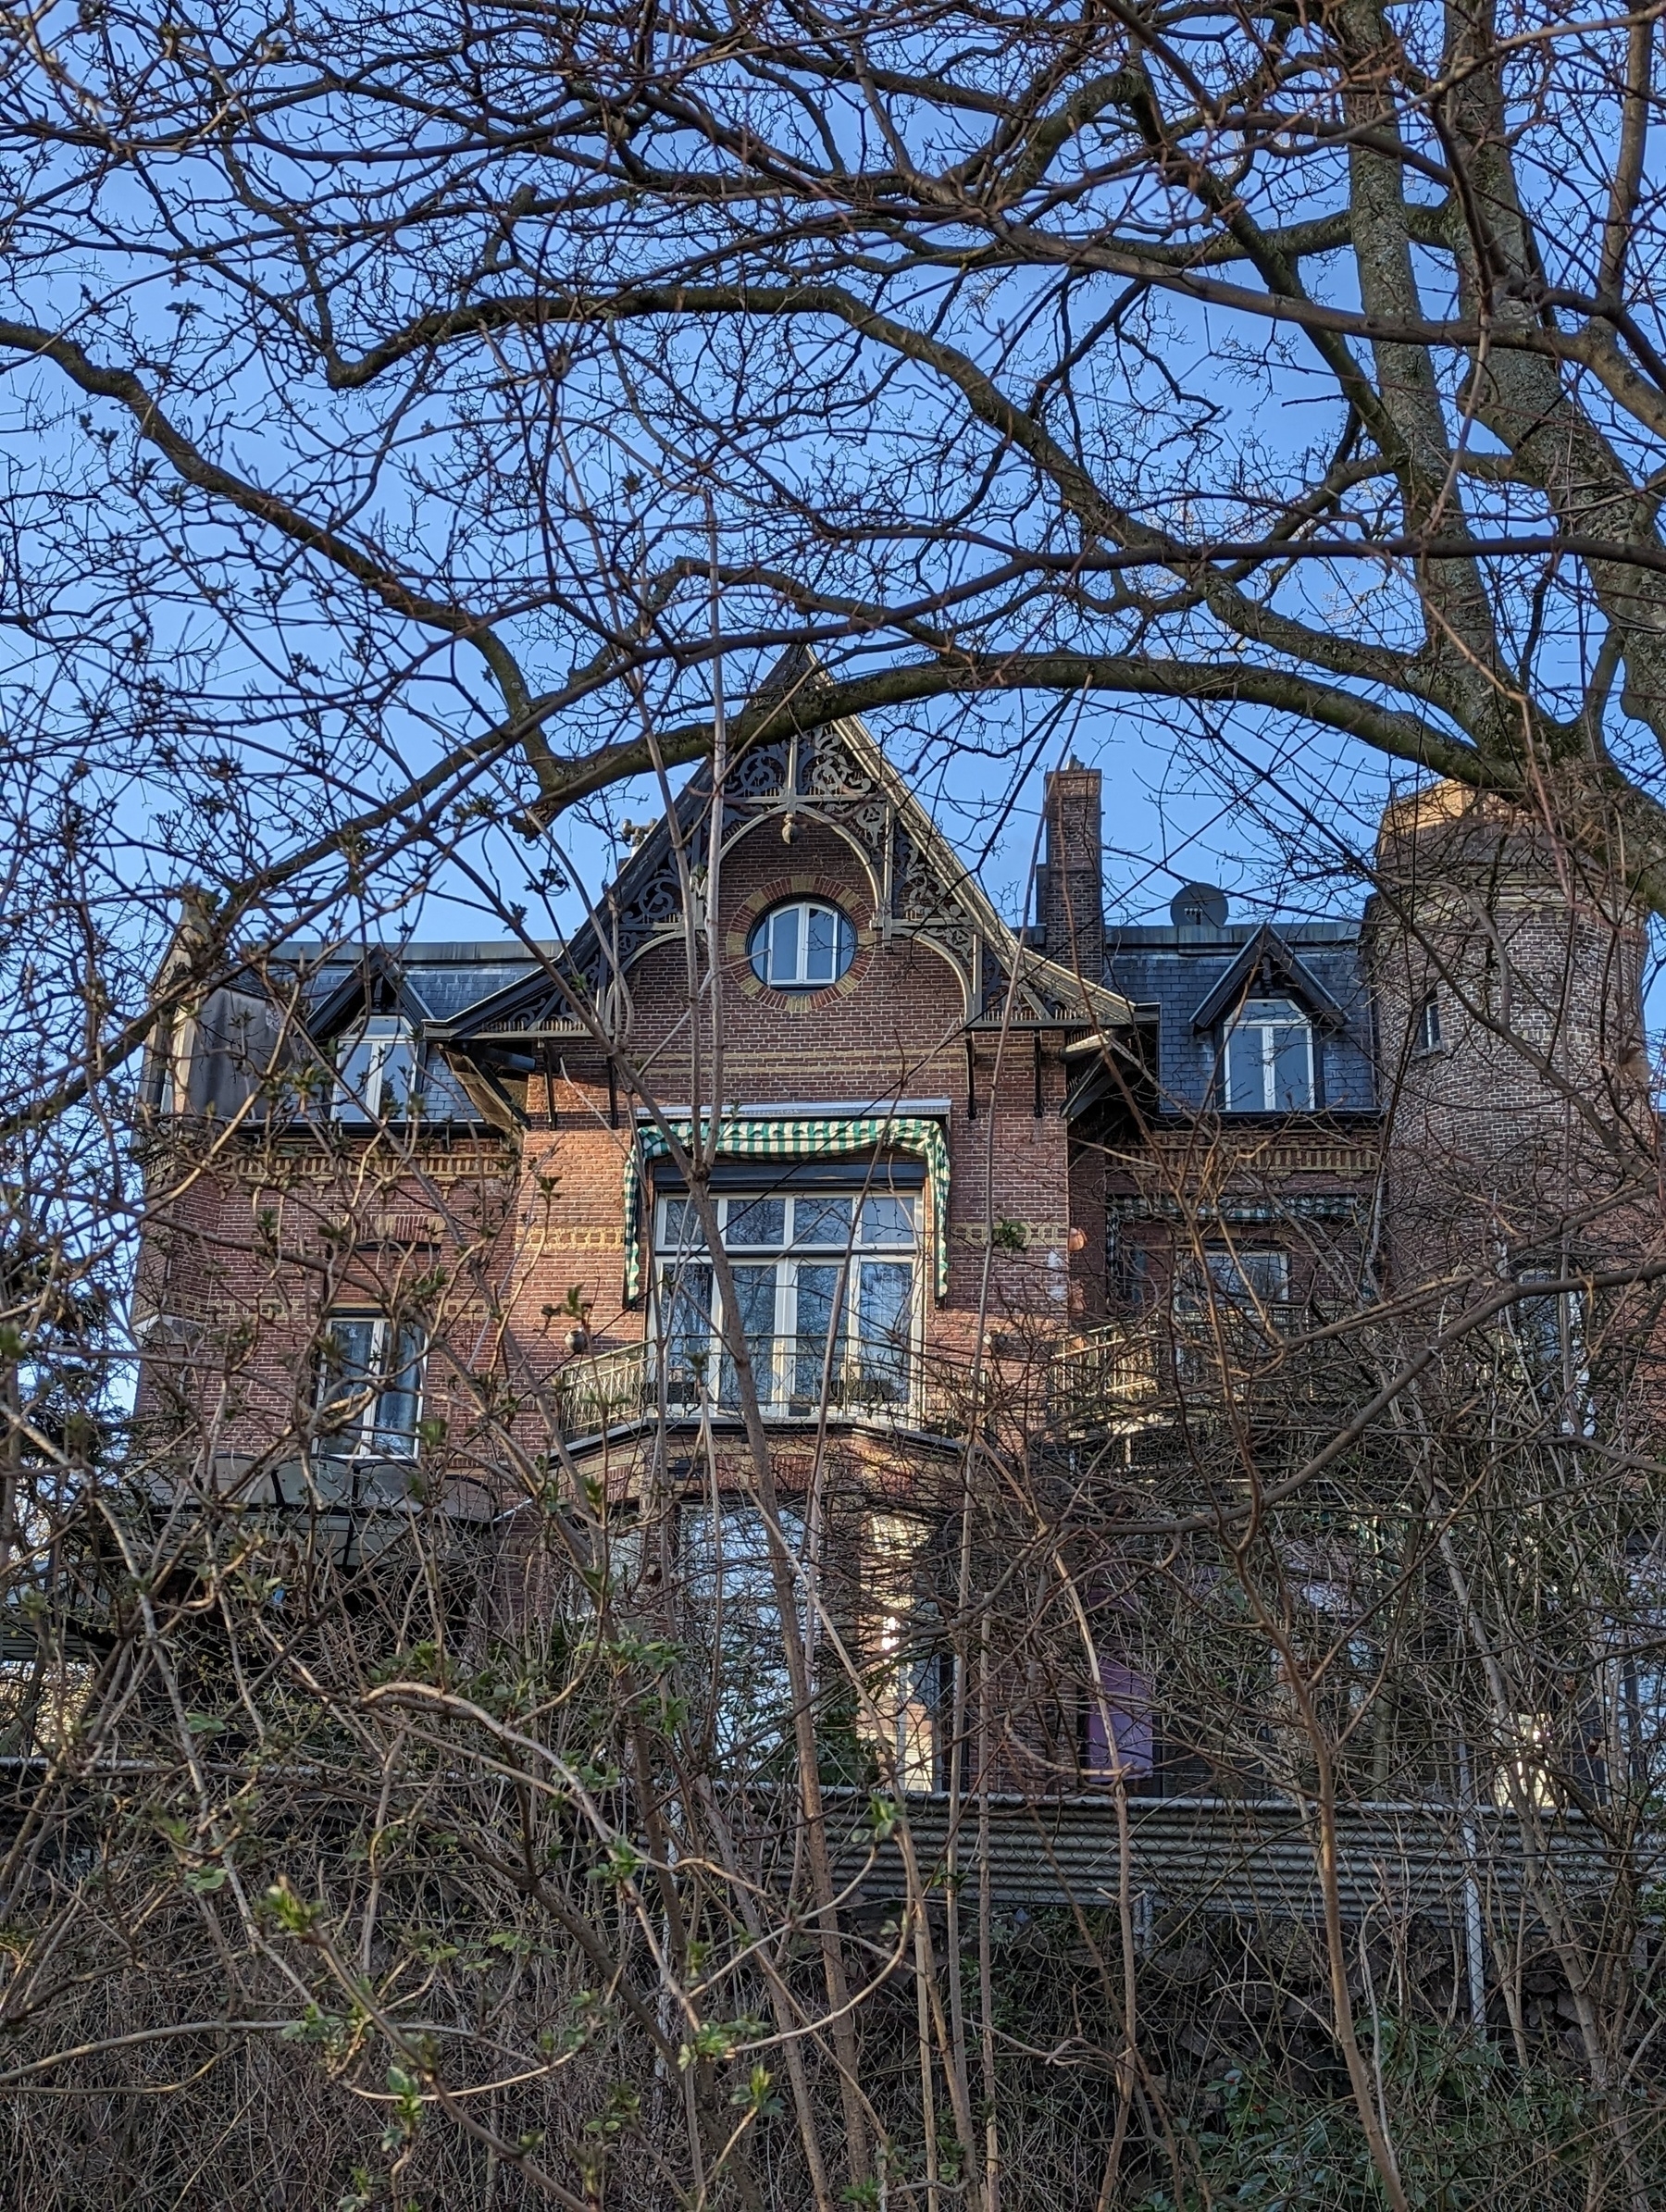 A house near the Vondelpark that I thought looked cool and haunted.